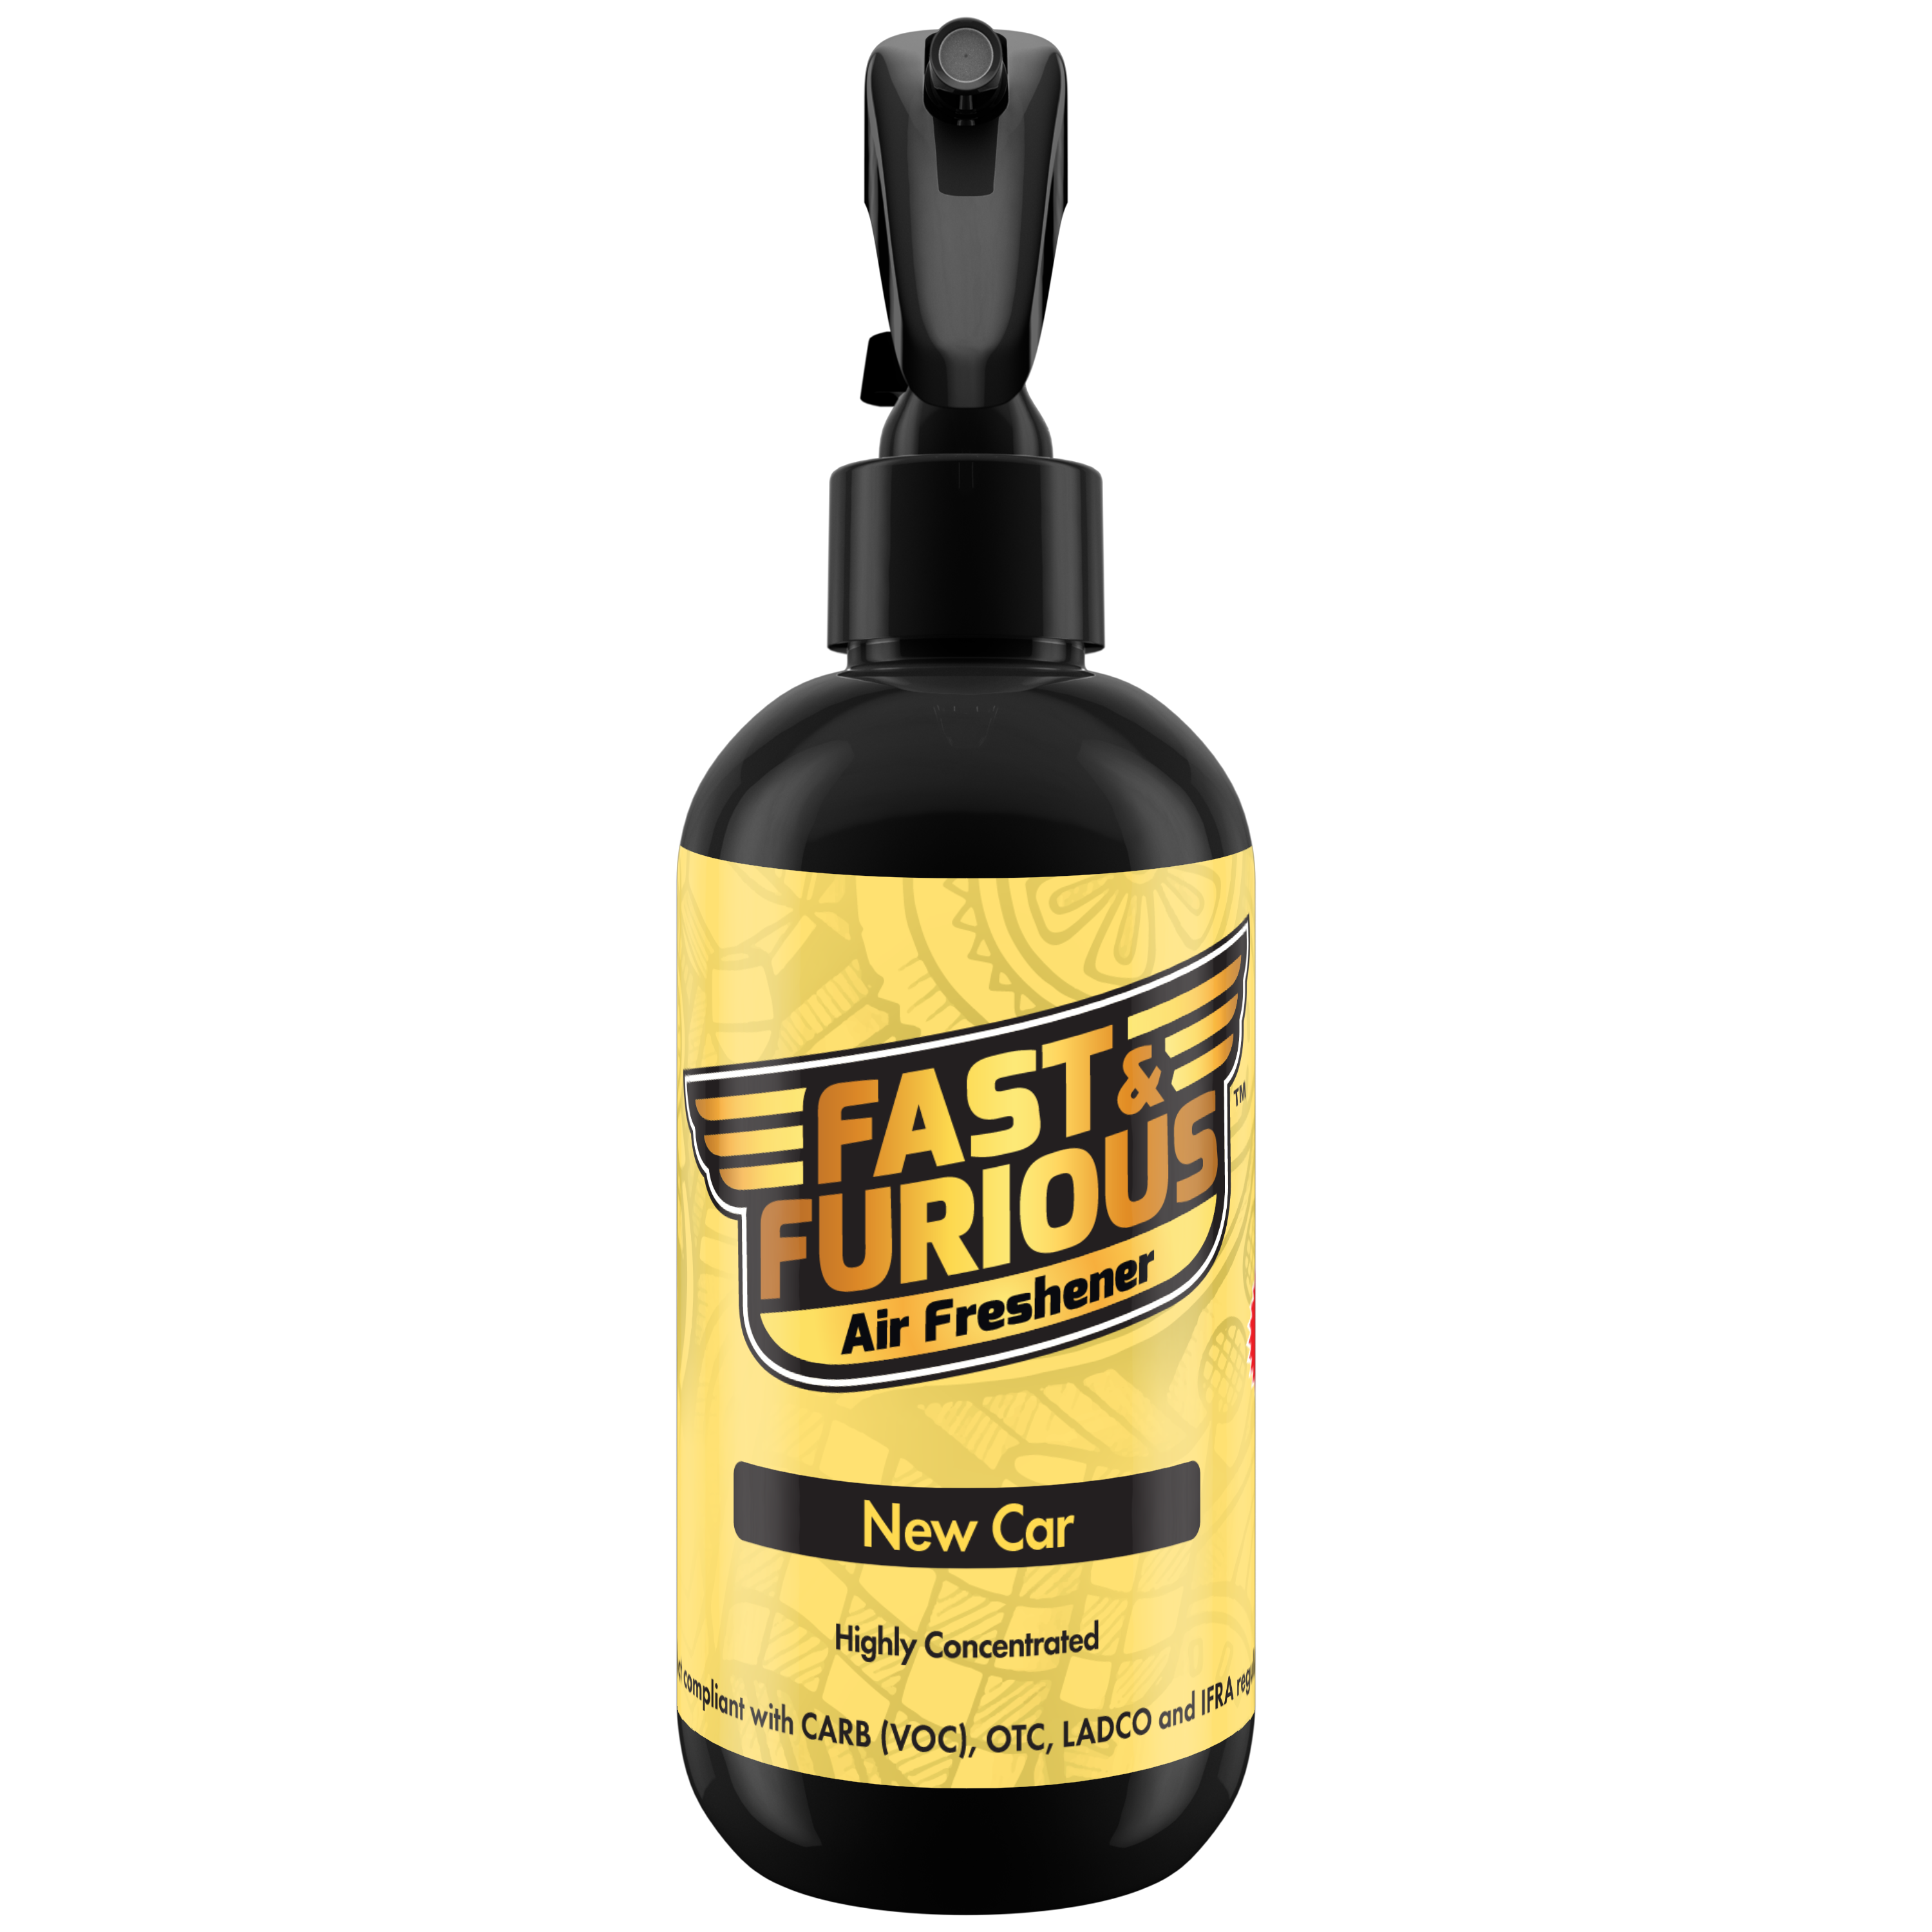 Fast and Furious Air Freshener - New Car Scent 1.5oz